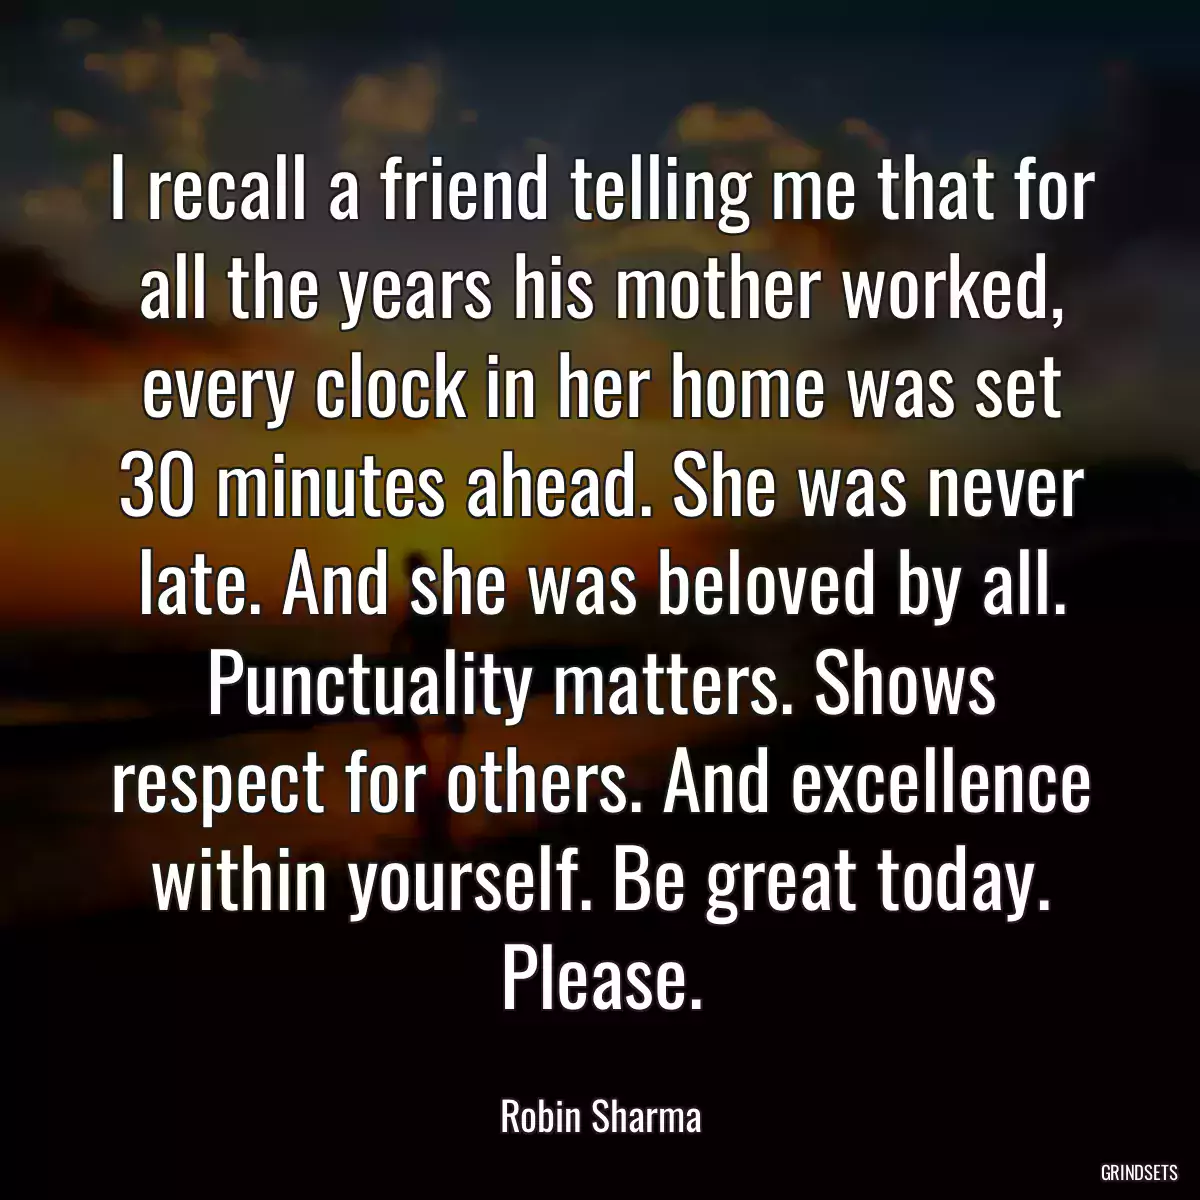 I recall a friend telling me that for all the years his mother worked, every clock in her home was set 30 minutes ahead. She was never late. And she was beloved by all. Punctuality matters. Shows respect for others. And excellence within yourself. Be great today. Please.